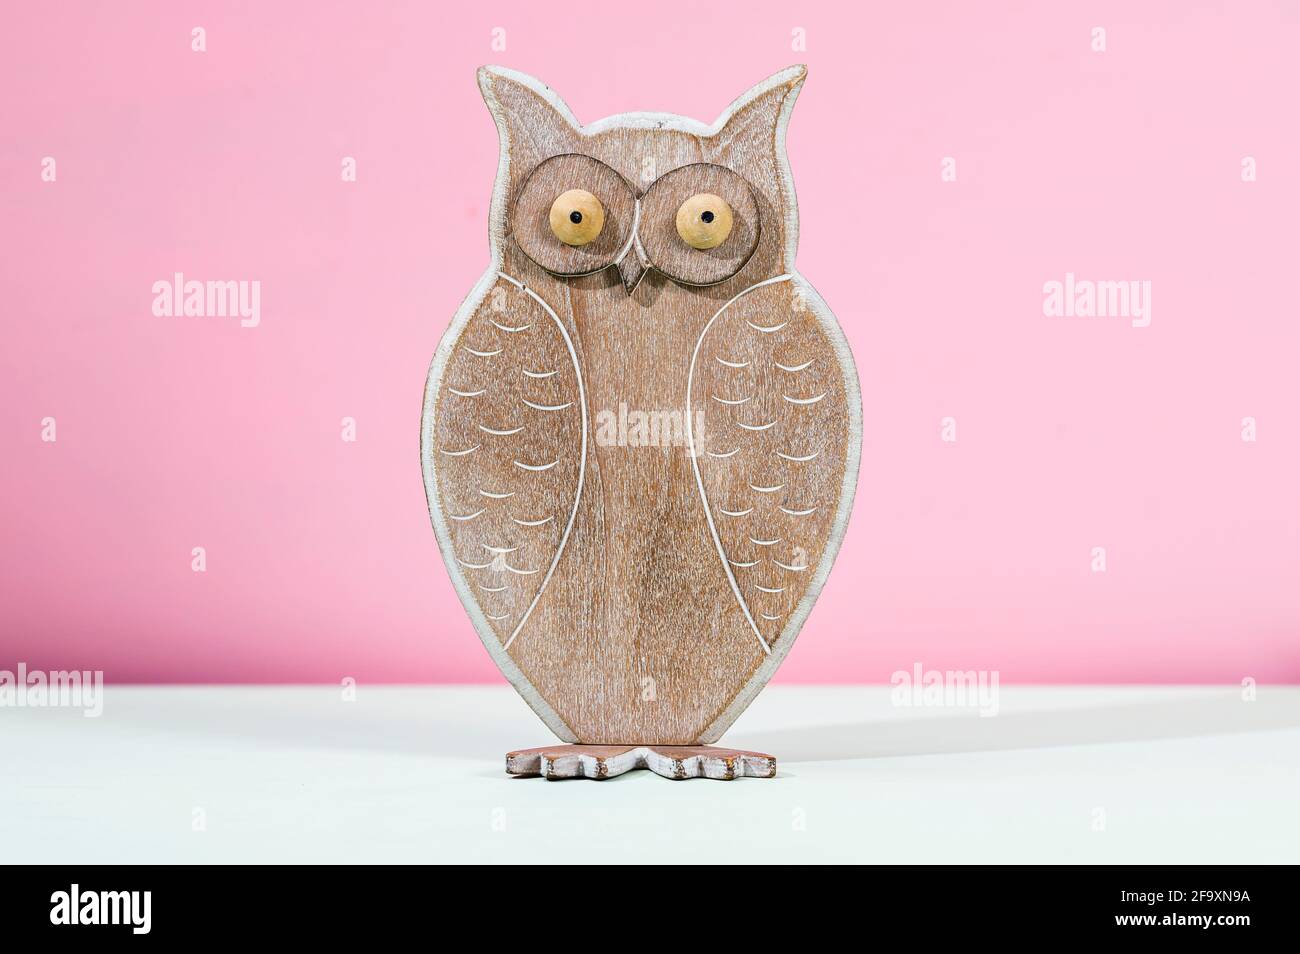 A wooden owl on a coloured background Stock Photo